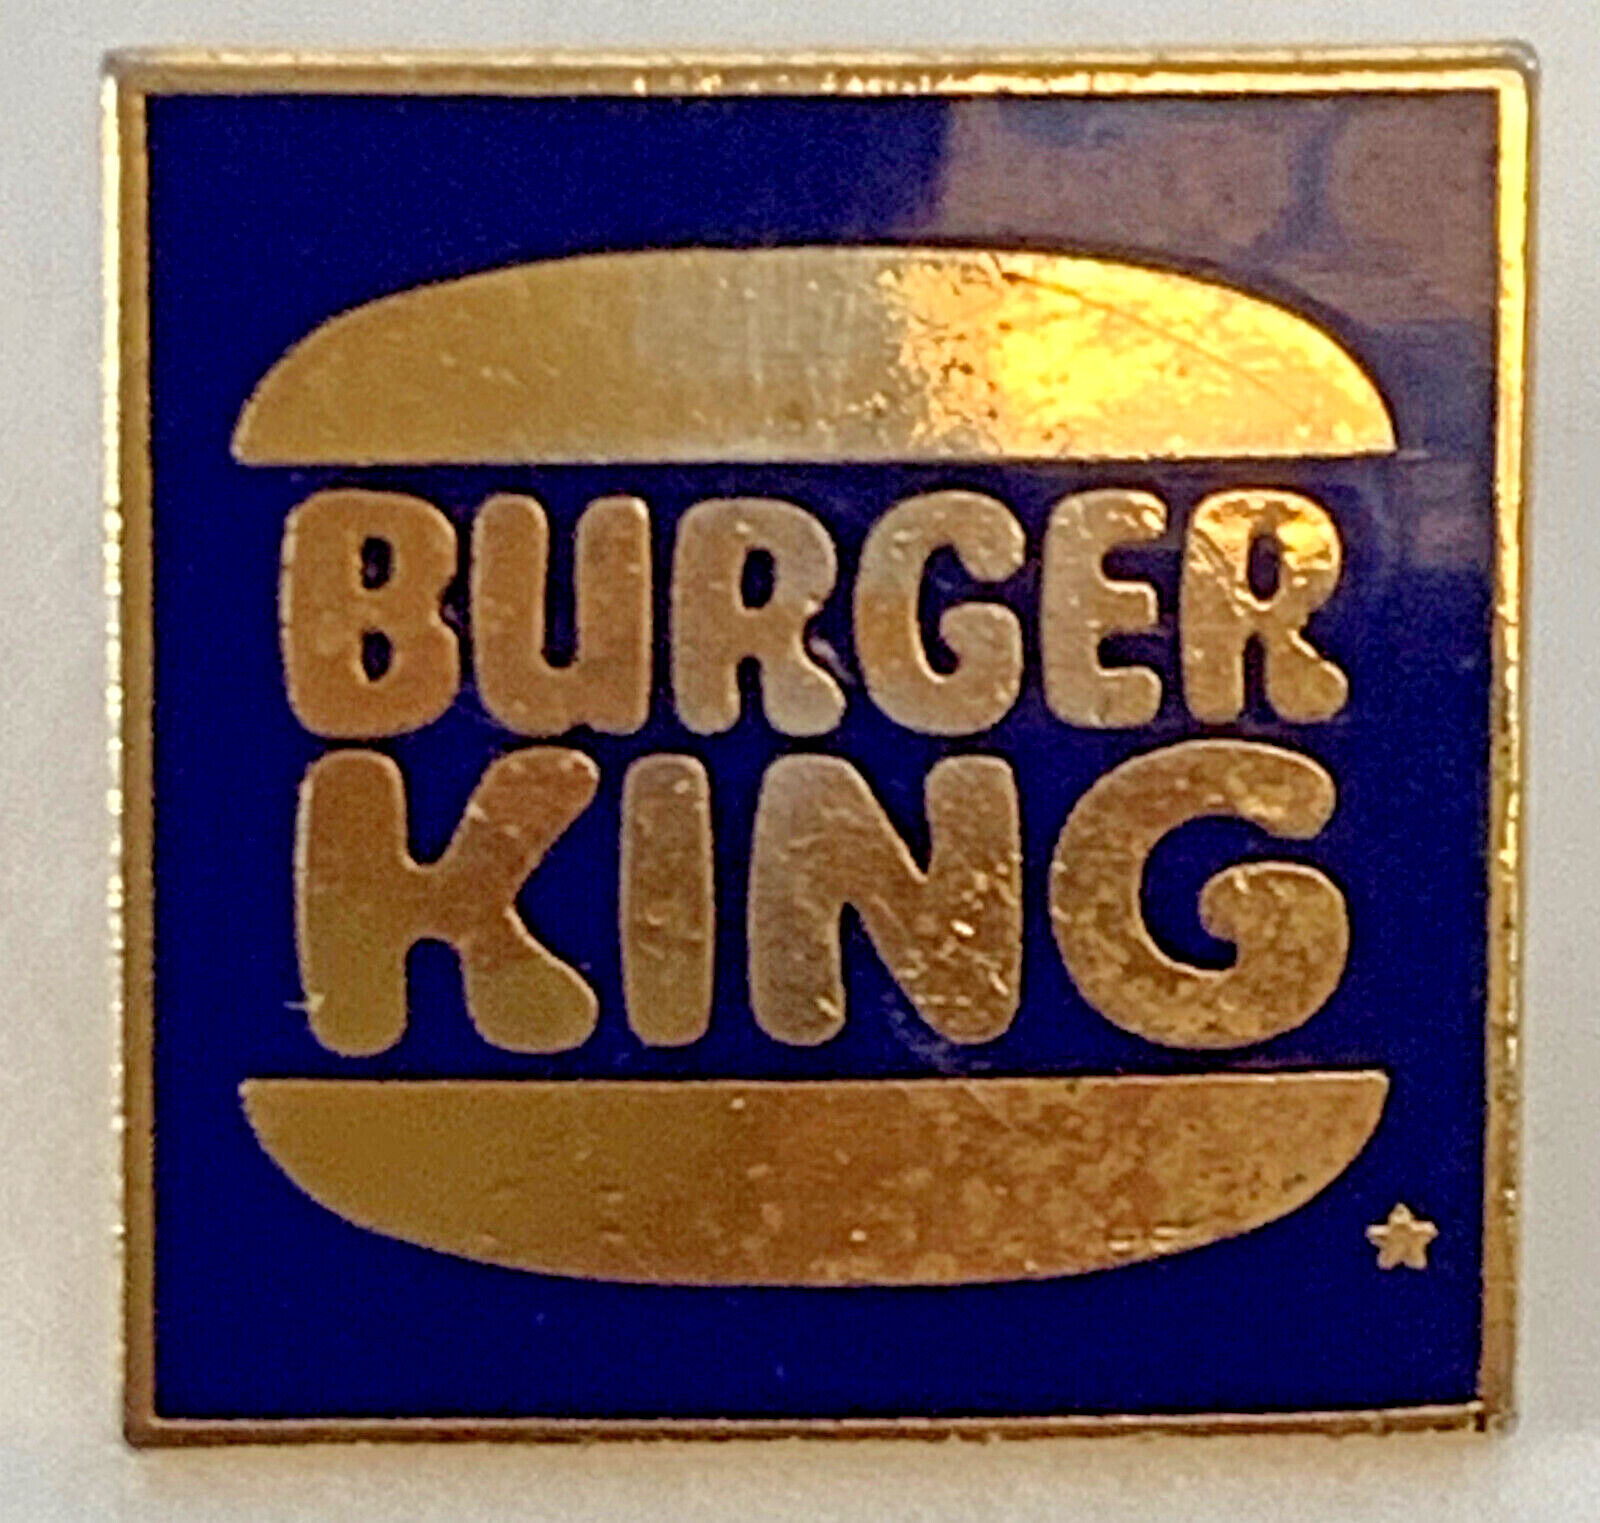 Burger King Fast Food Restaurant Vintage Colorful Collectible Lapel Pin.